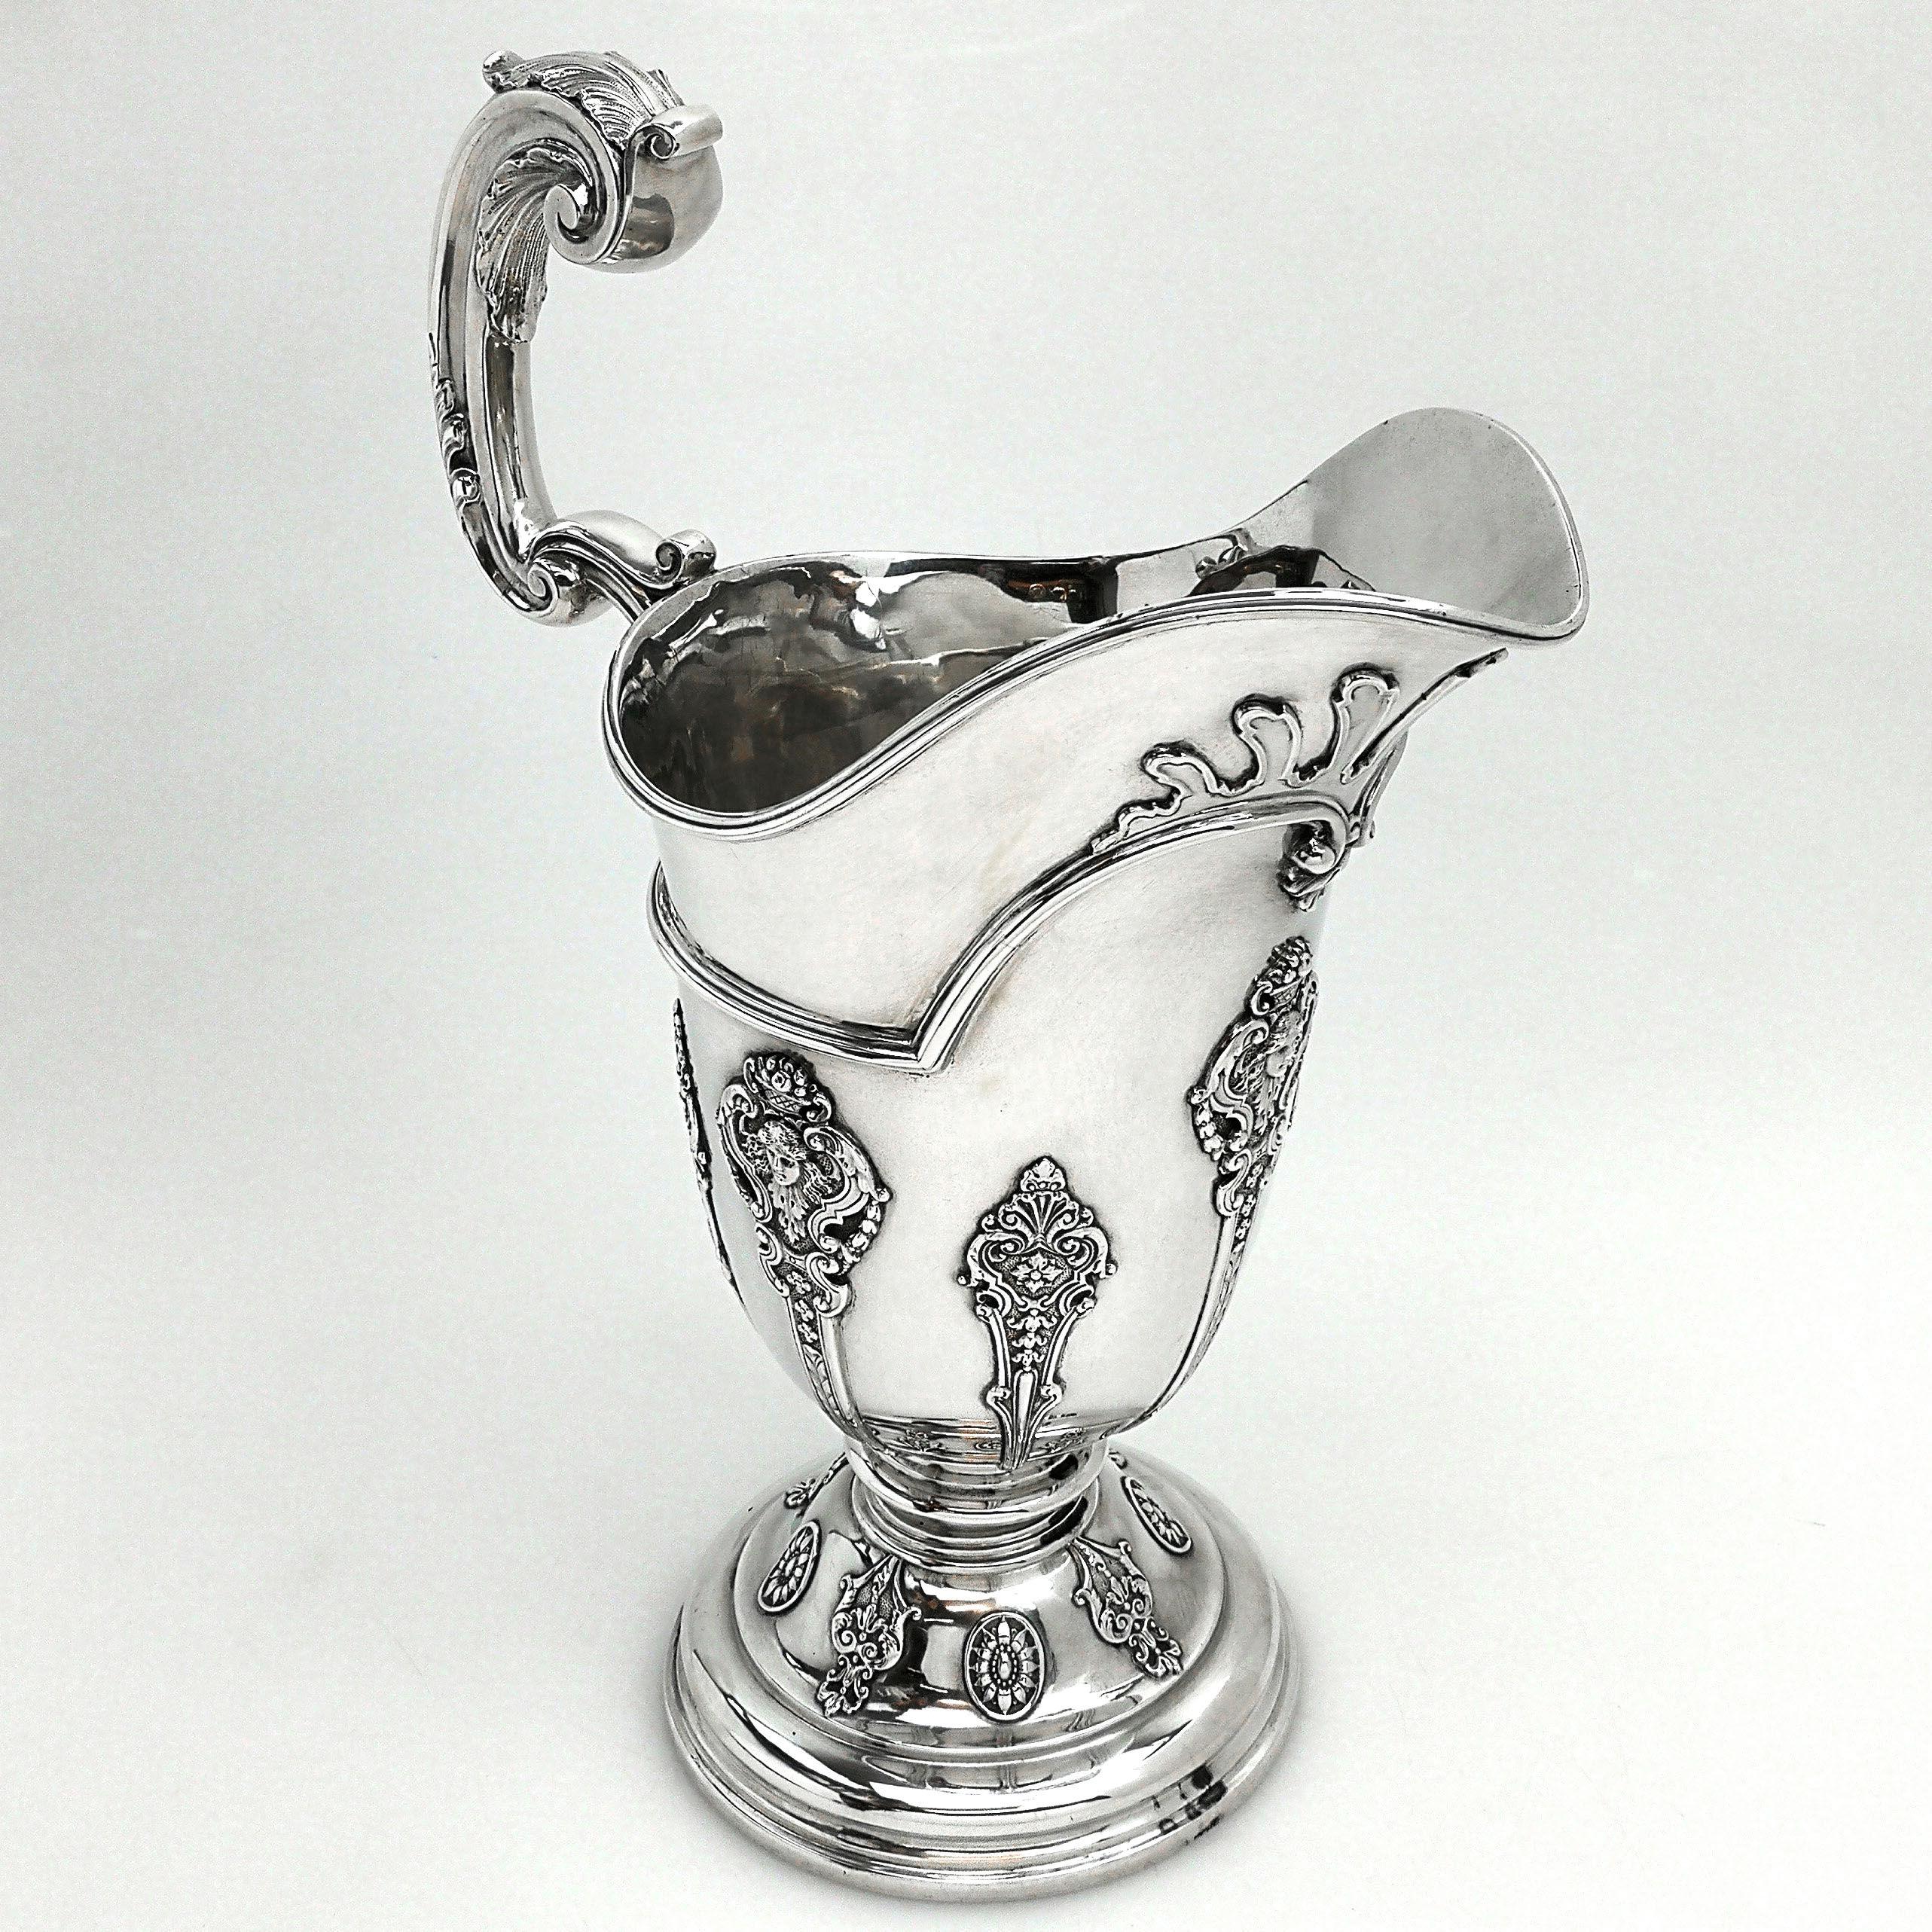 A magnificent Antique Victorian solid Silver Jug with a magnificent everted spout. The Pitcher stands on a side pedestal foot and has an impressive acanthus leaf scroll handle. The body of the Jug and pedestal foot are both decorated with intricate